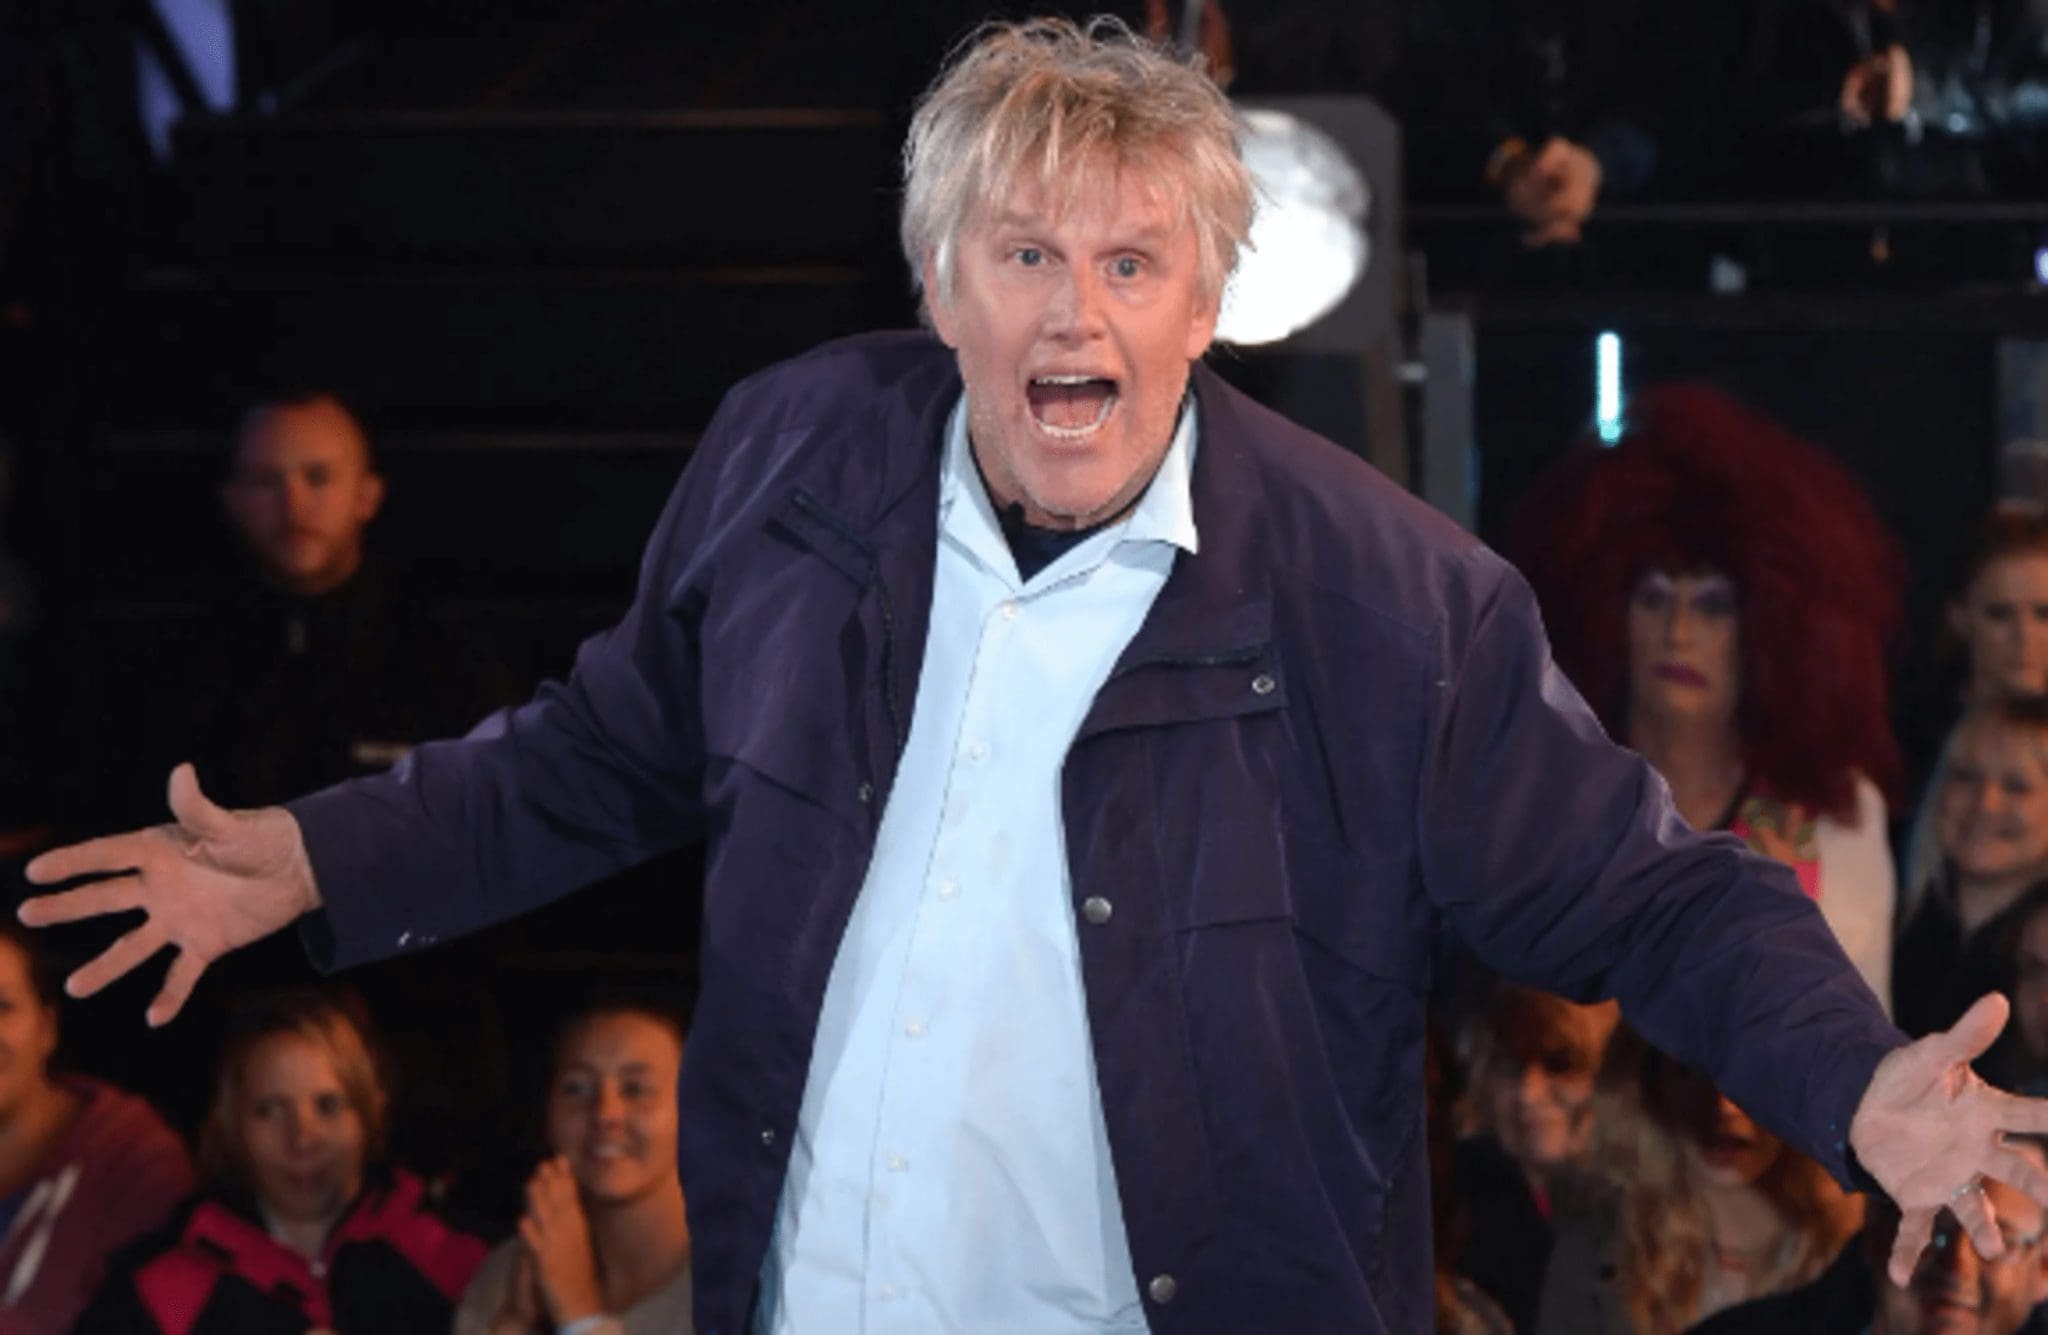 At A NJ Horror Film Convention, Actor Gary Busey Was Accused Of Sexual Offences